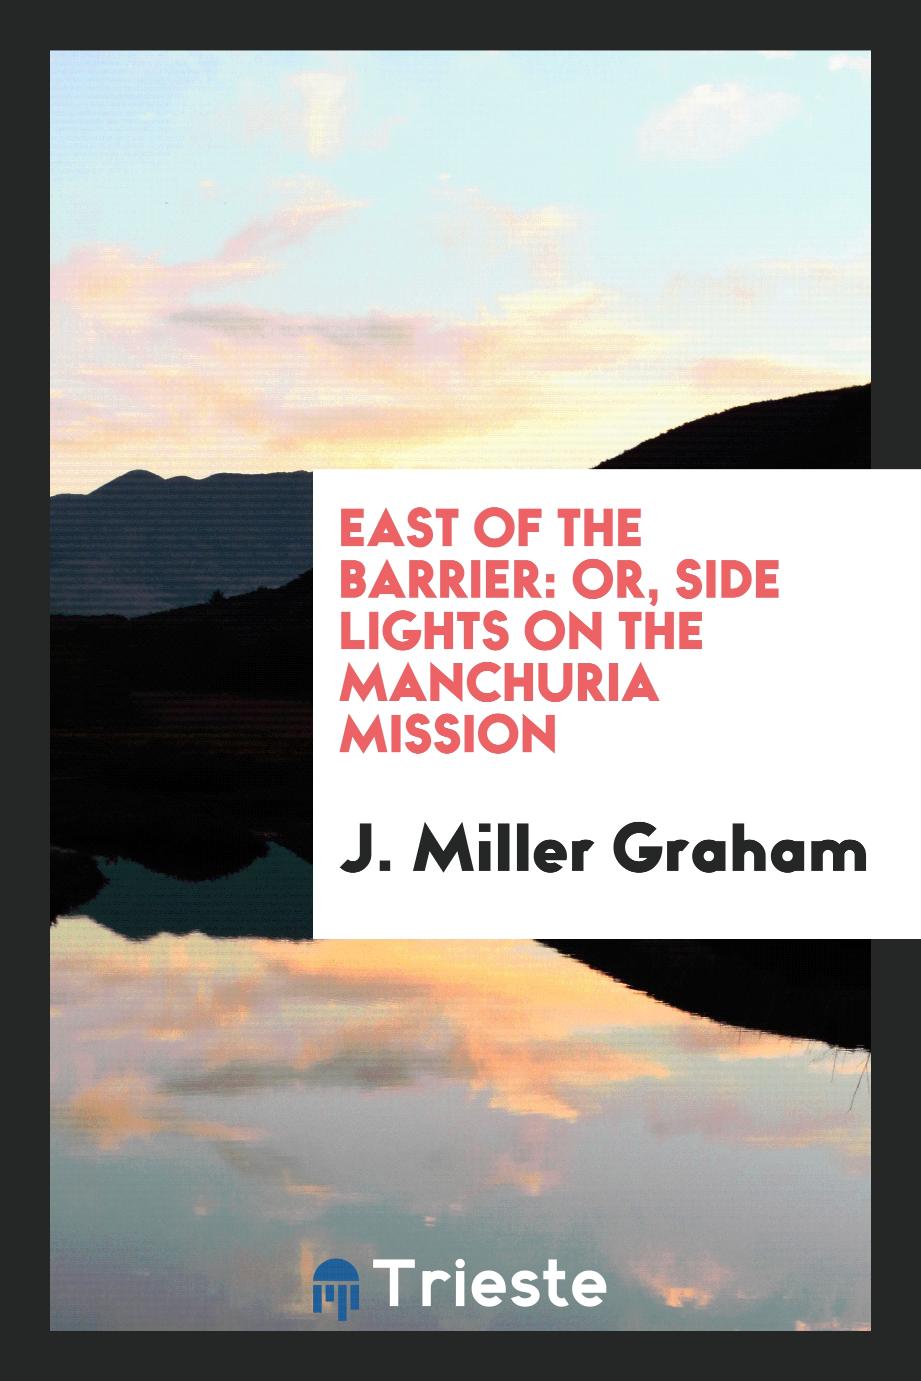 East of the barrier: or, side lights on the Manchuria mission